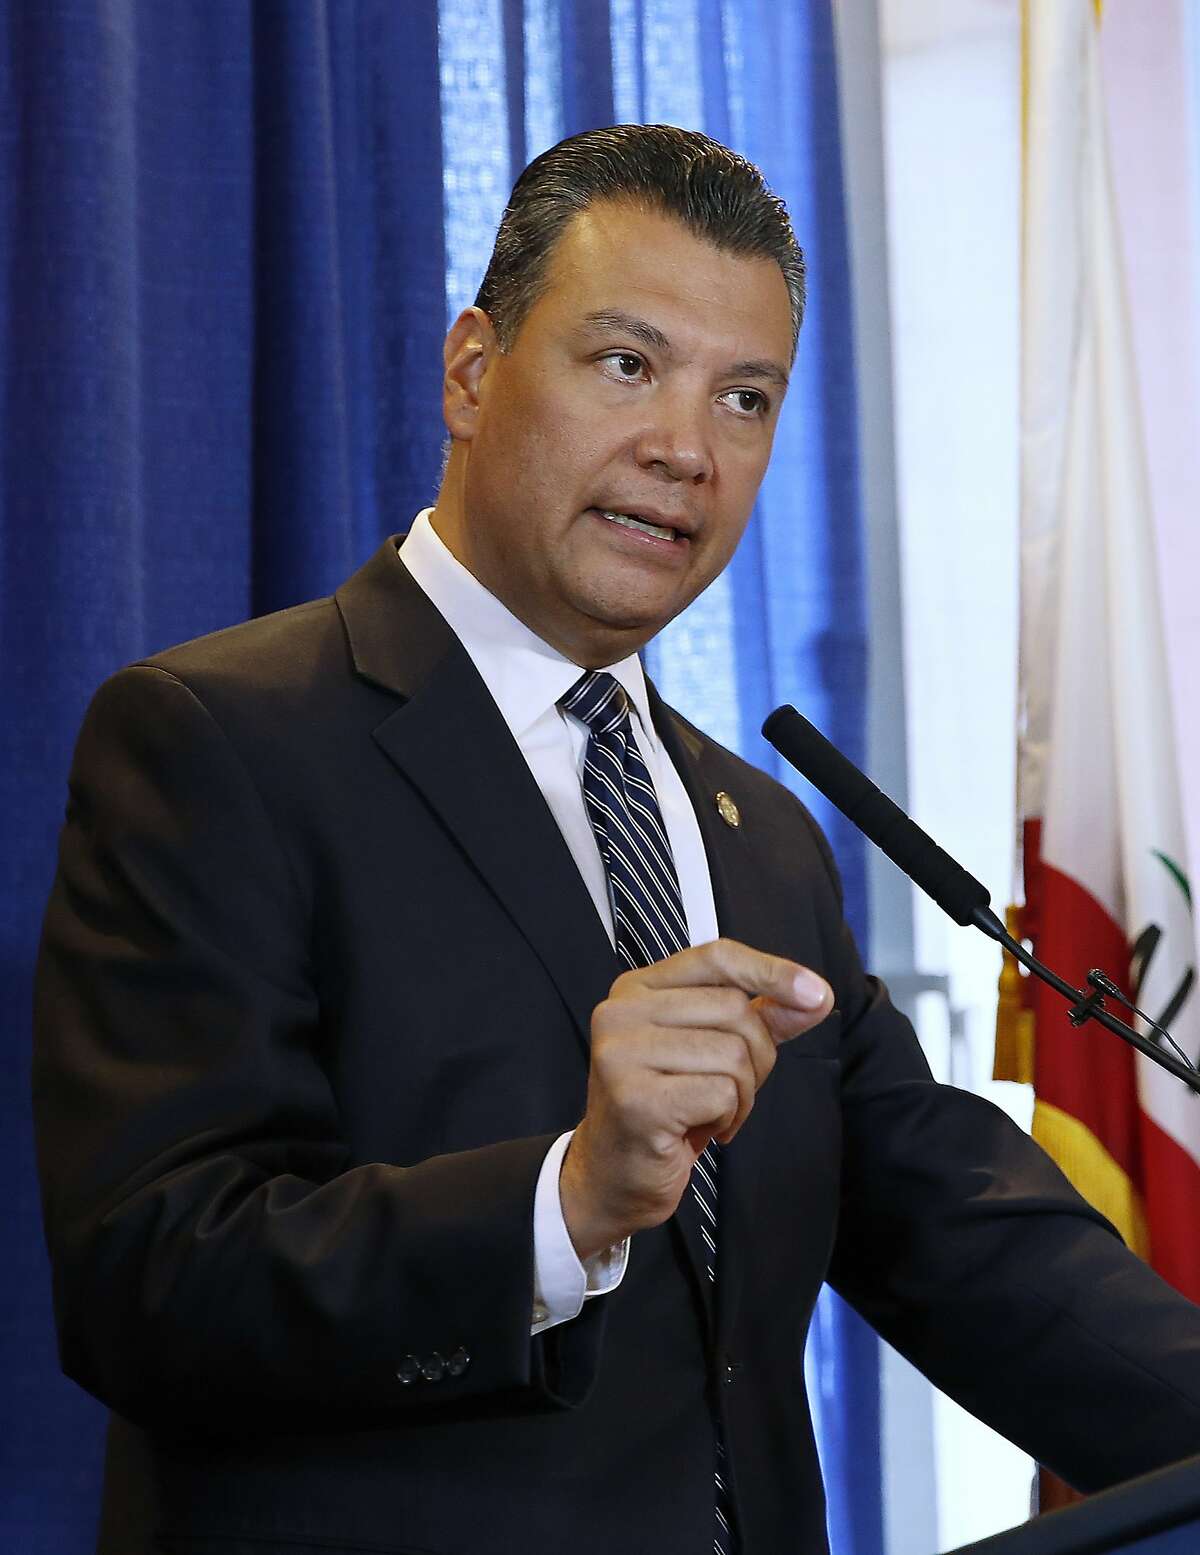 California Secretary of State Alex Padilla responds to a question concerning the voter registration of ineligible people by the California Department of Motor Vehicles, Tuesday, Oct. 9, 2018, in Sacramento, Calif. Padilla says he doesn't yet know if any of the roughly 1,500 people mistakenly registered to vote by the DMV voted in the June primary election. (AP Photo/Rich Pedroncelli)